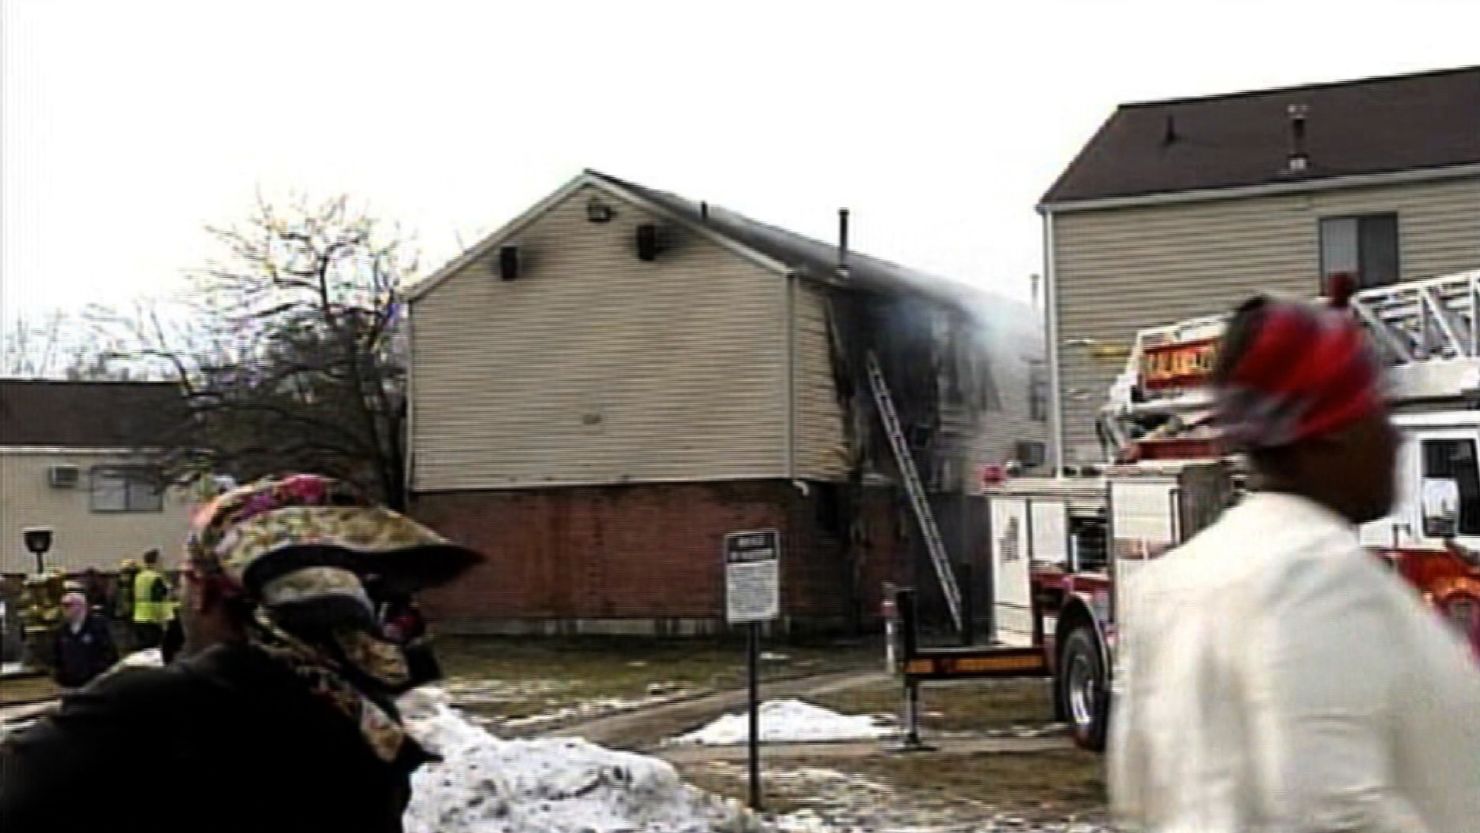 Three children, ages 1, 3 and 3, died in an apartment fire in Kalamazoo, Michigan, on Monday.